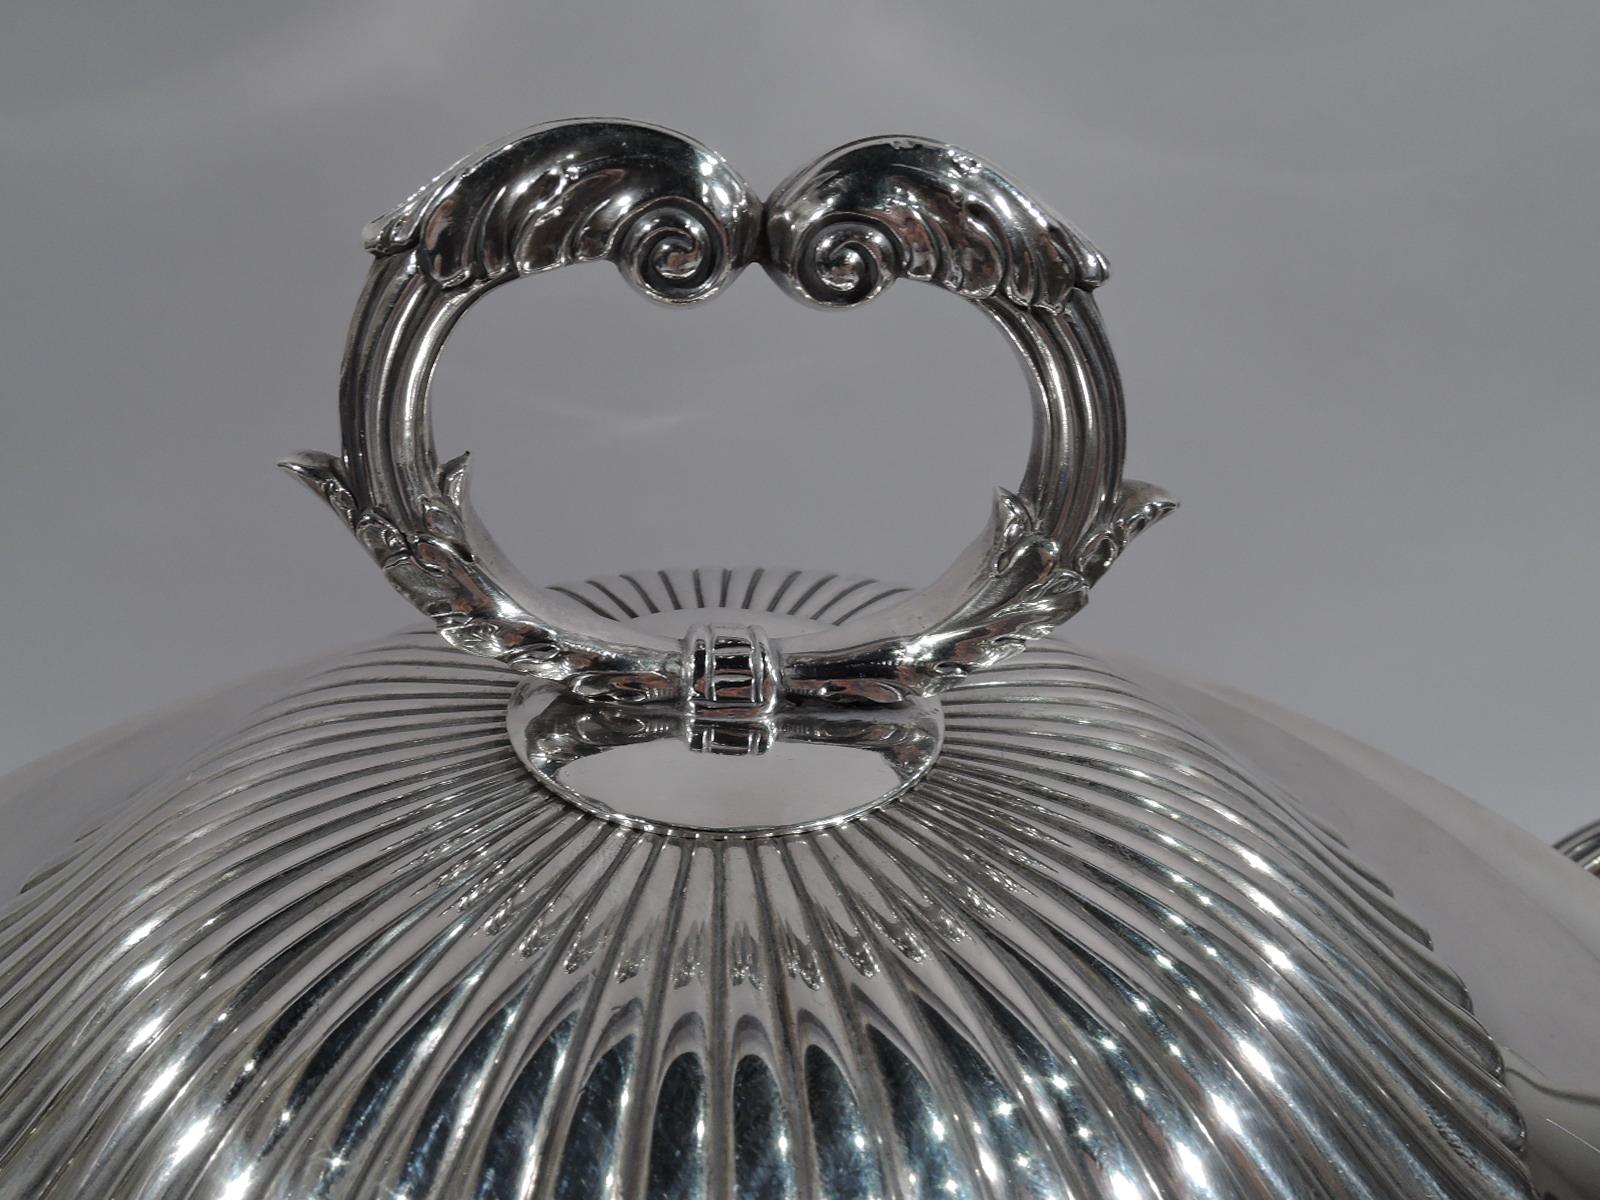 Magnificent English Regency Sterling Silver Soup Tureen by Paul Storr 1